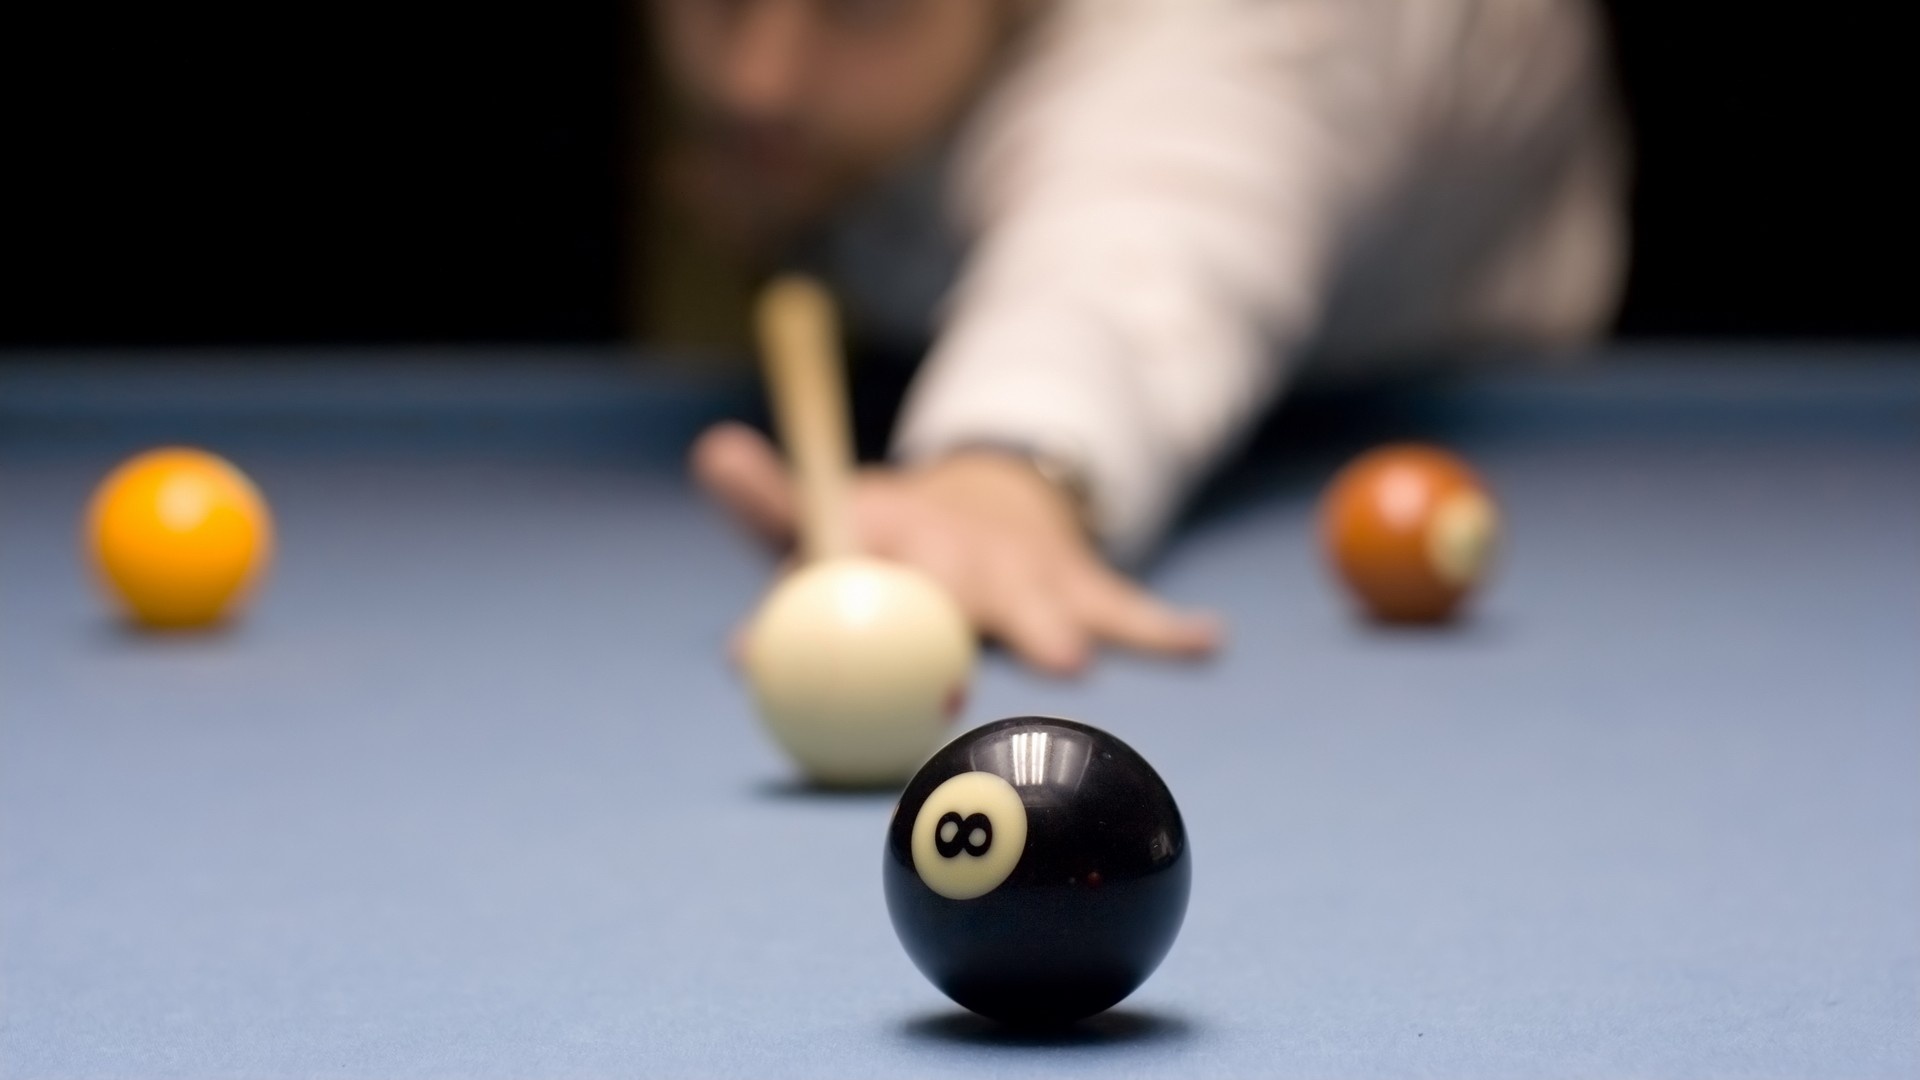 Cue Sports: Eight-ball, A pool billiards played on a billiard table with six pockets and sixteen billiard balls. 1920x1080 Full HD Background.